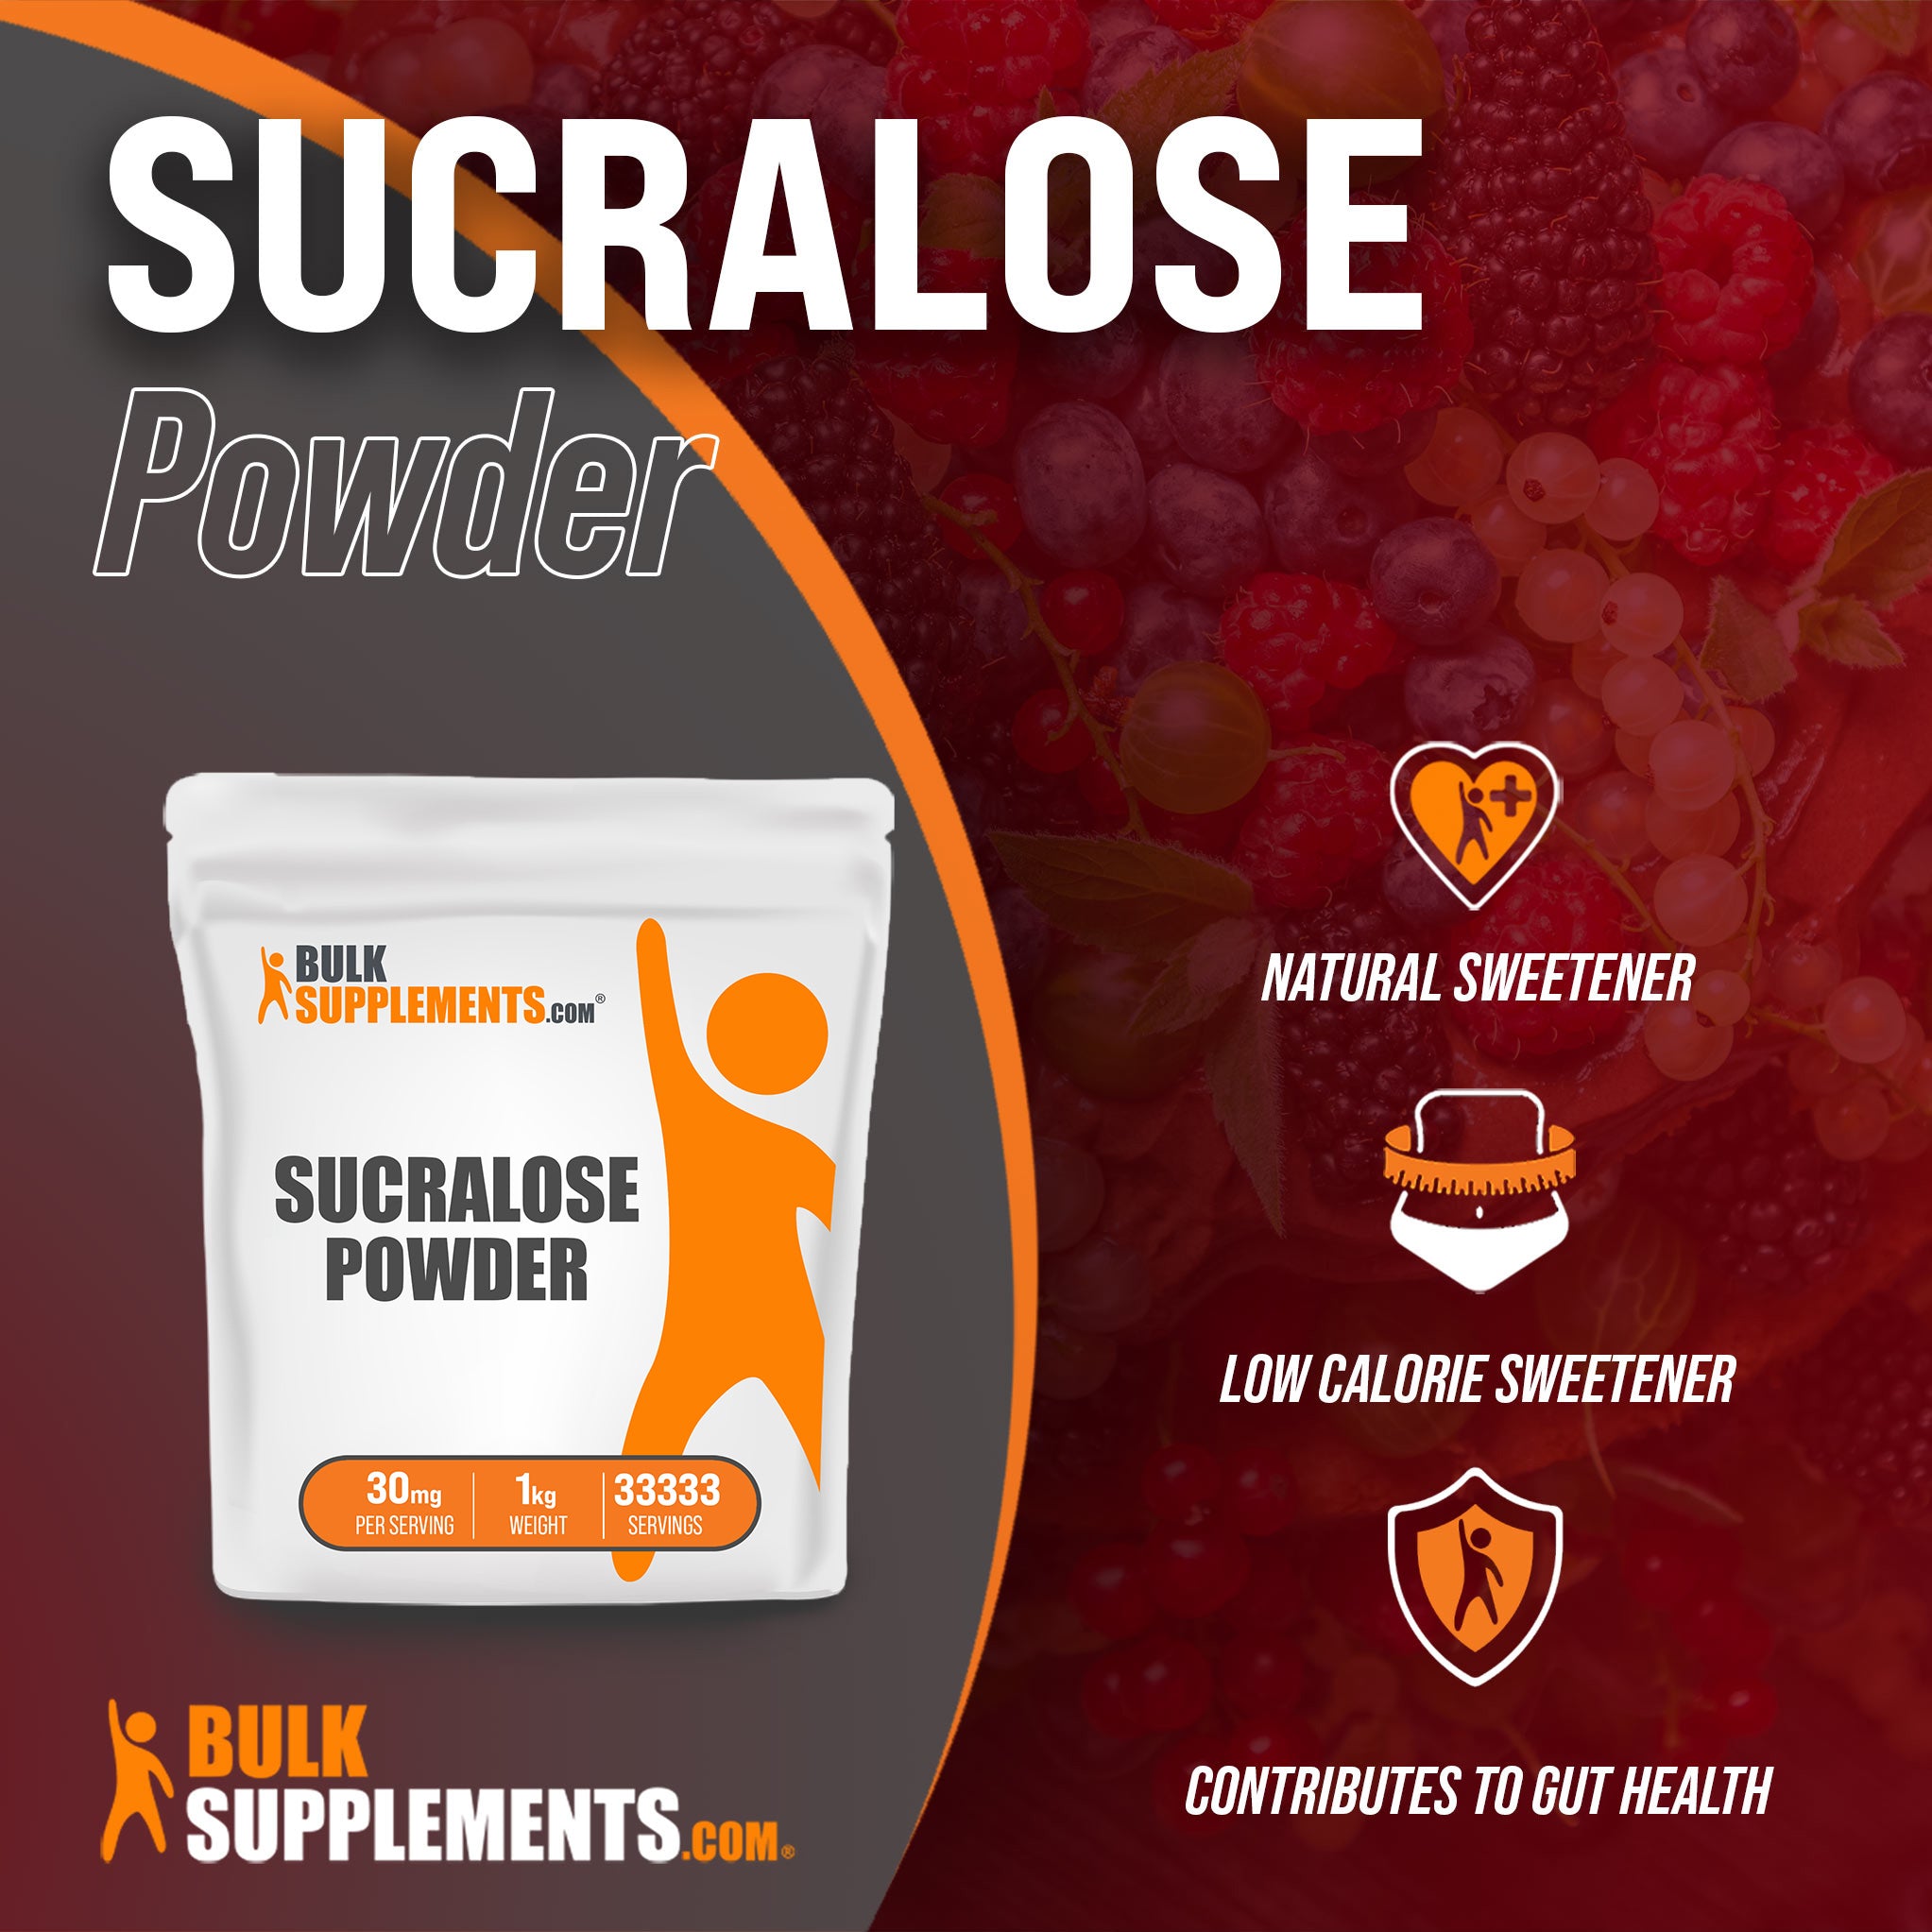 Benefits of Sucralose: natural sweetener, low calorie sweetener, contributes to gut health